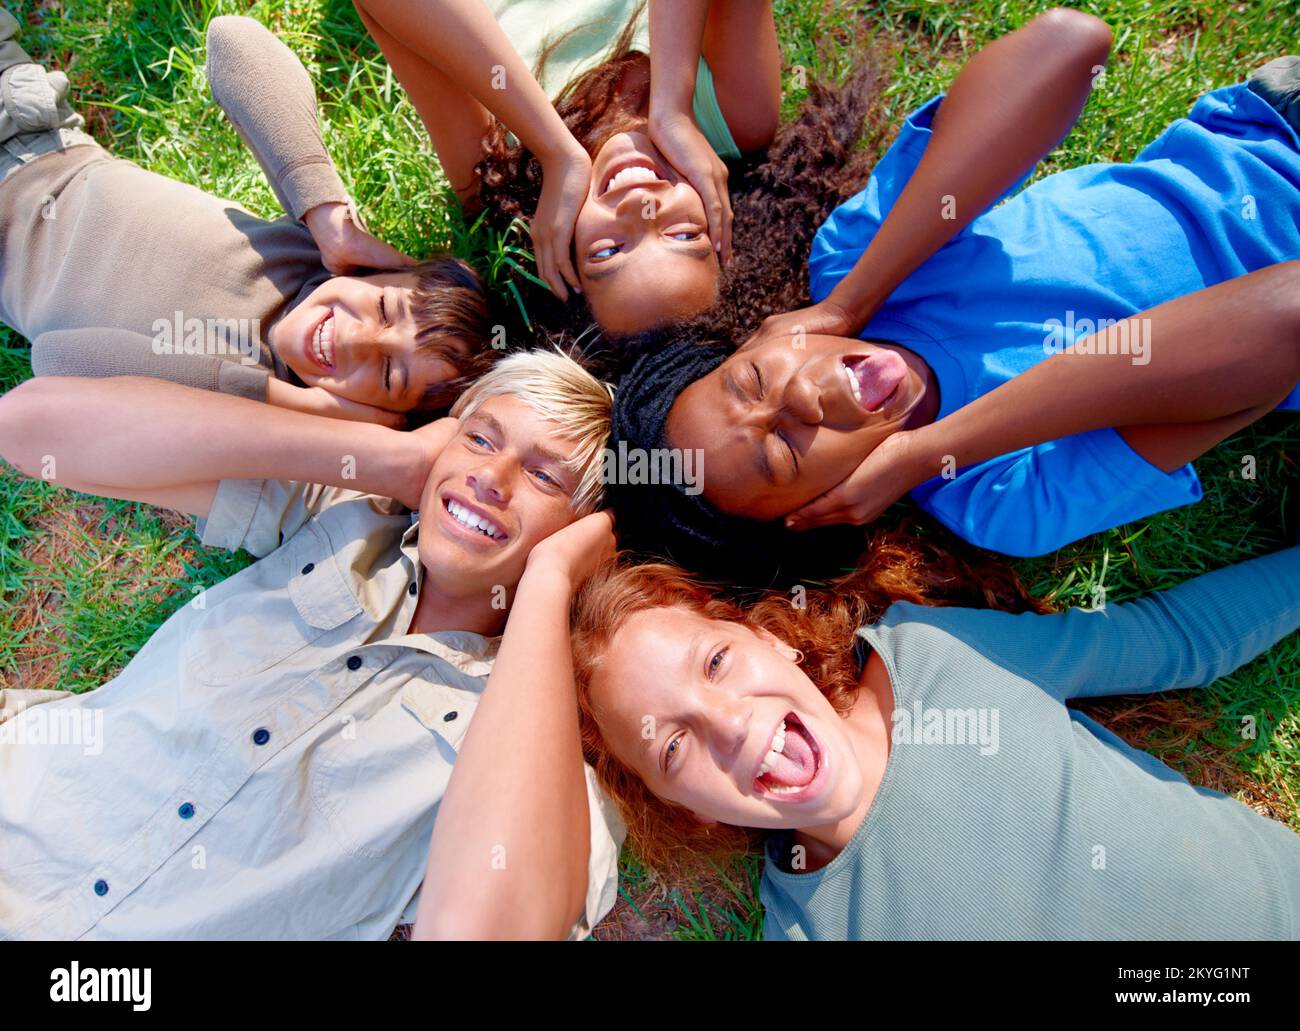 We cant contain the joy. High angle view of a group of kids lying down and covering their ears while they laugh at the camera. Stock Photo